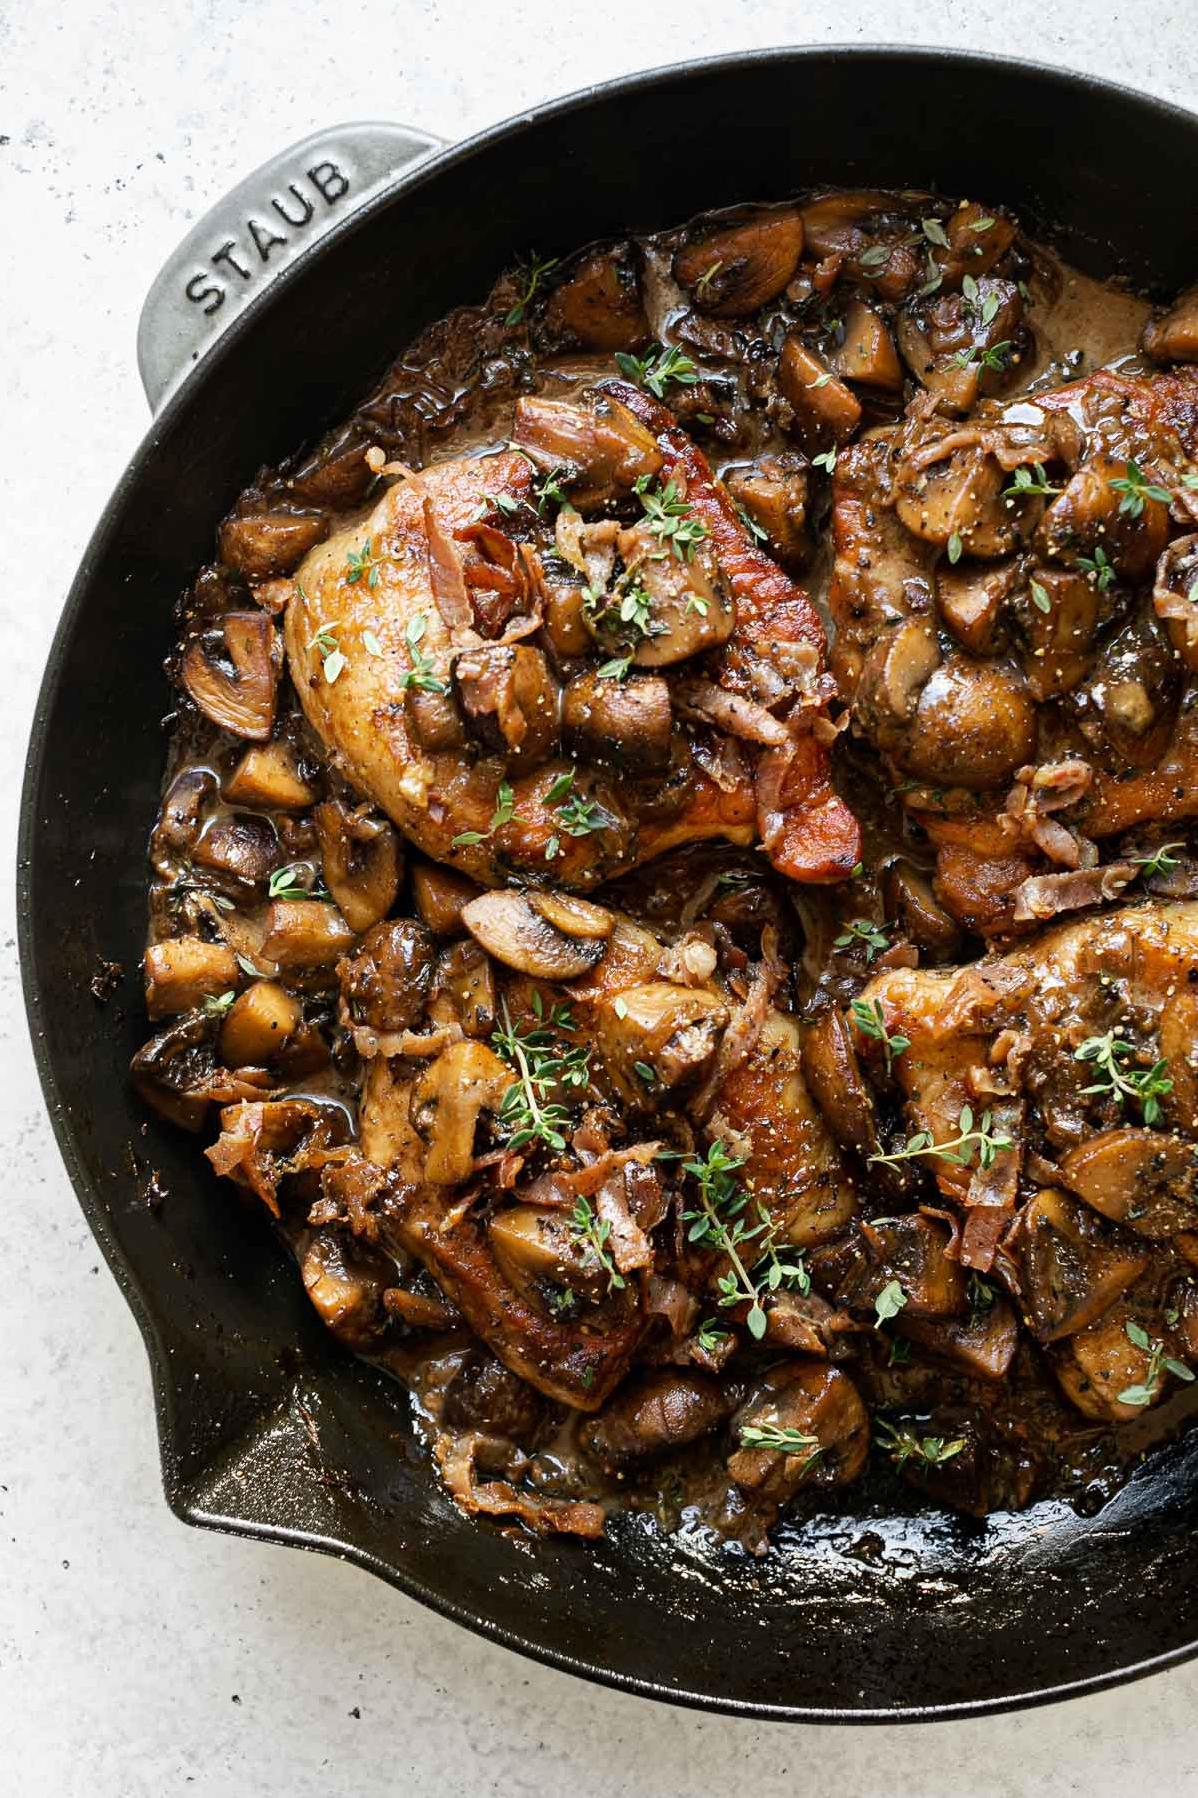  Juicy pork chops seared to perfection in Marsala wine.